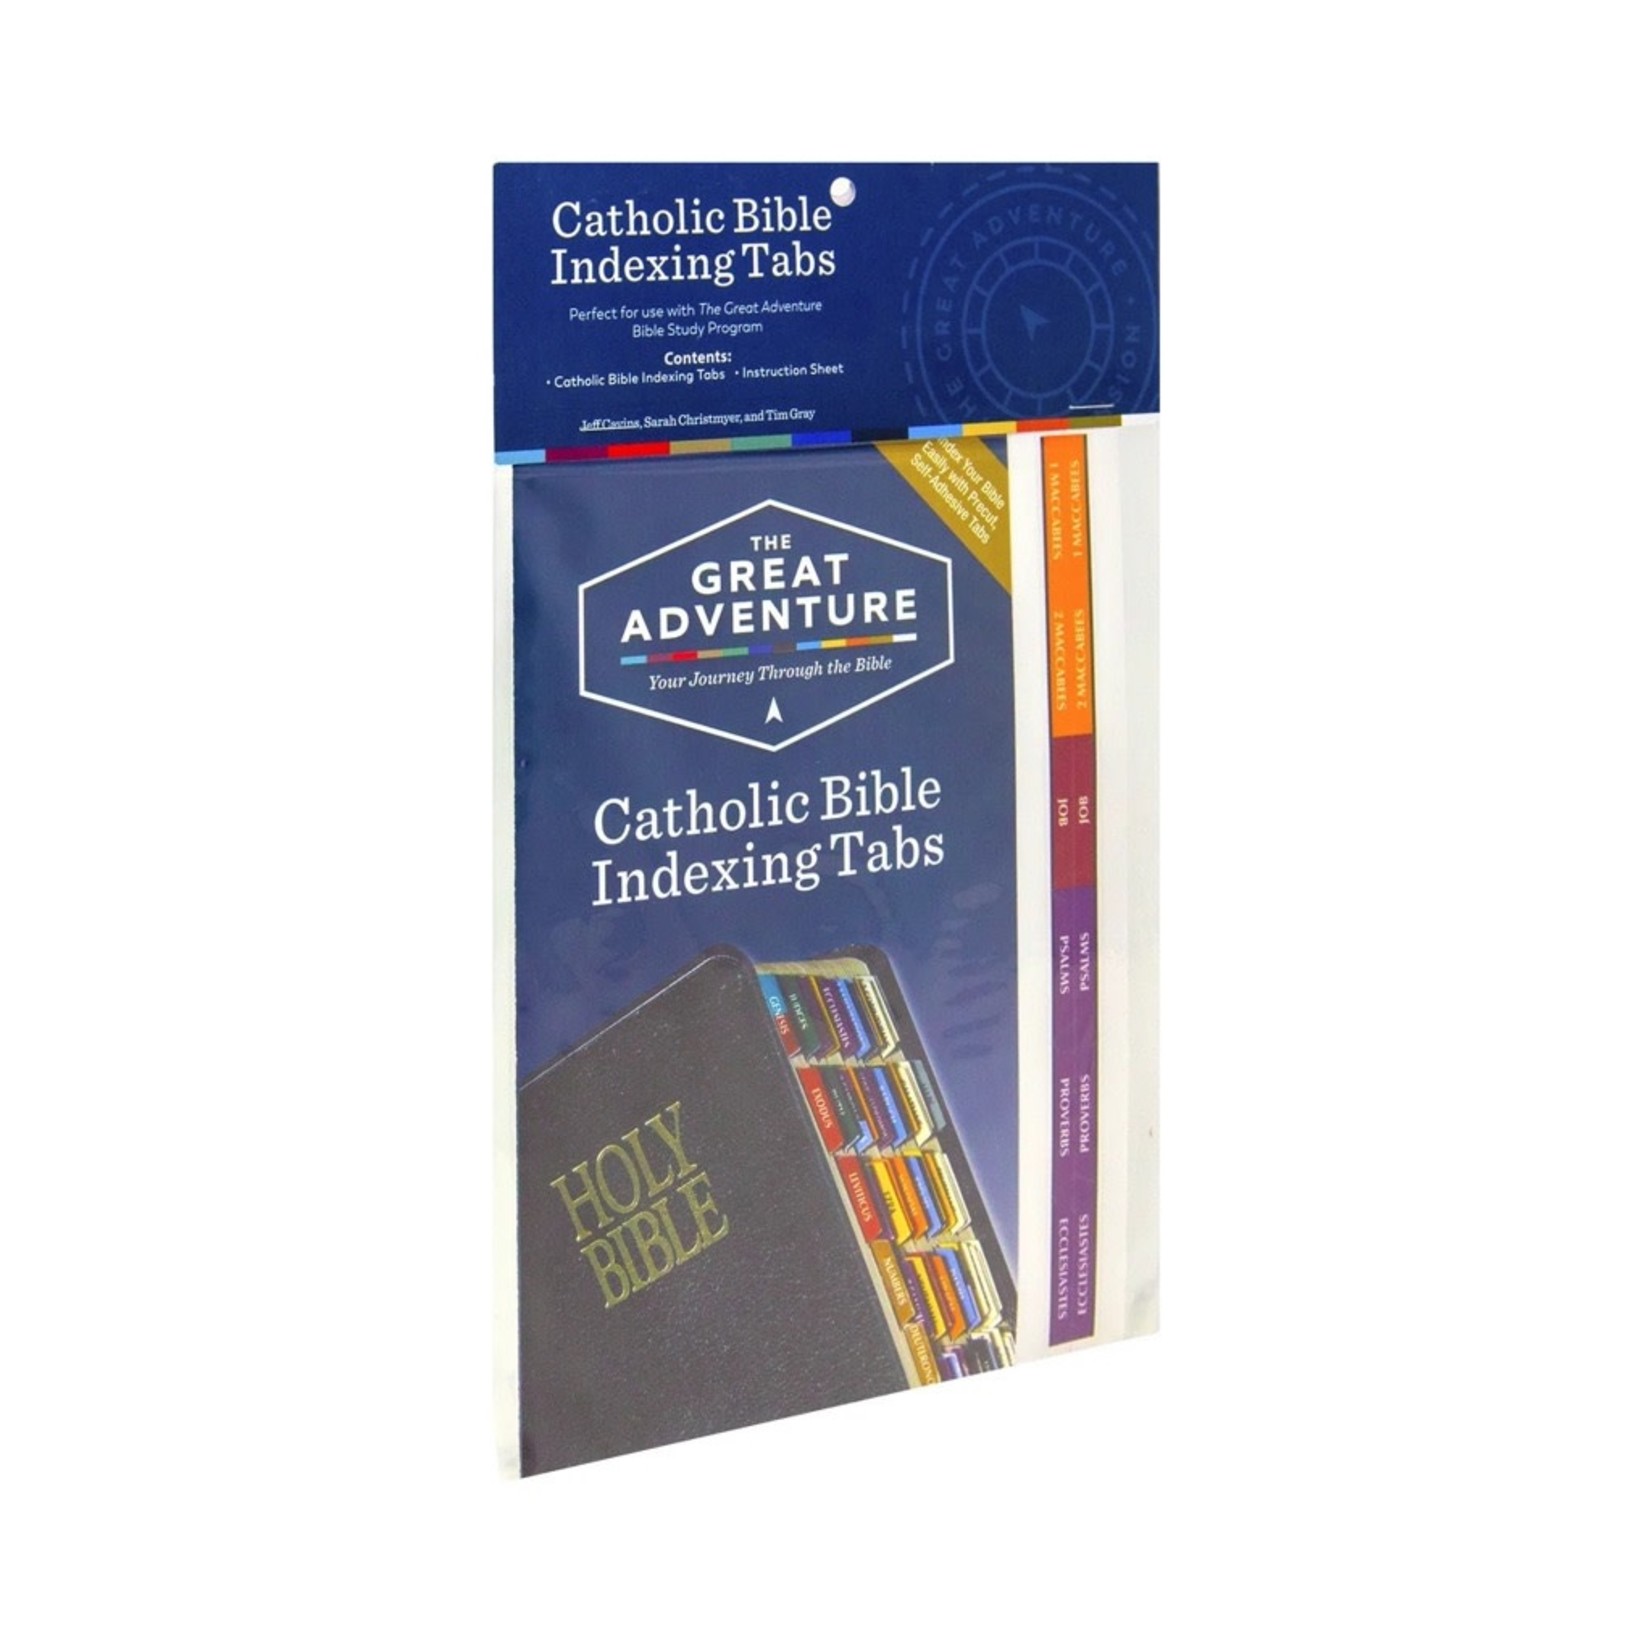 The Great Adventure Bible Indexing Tabs